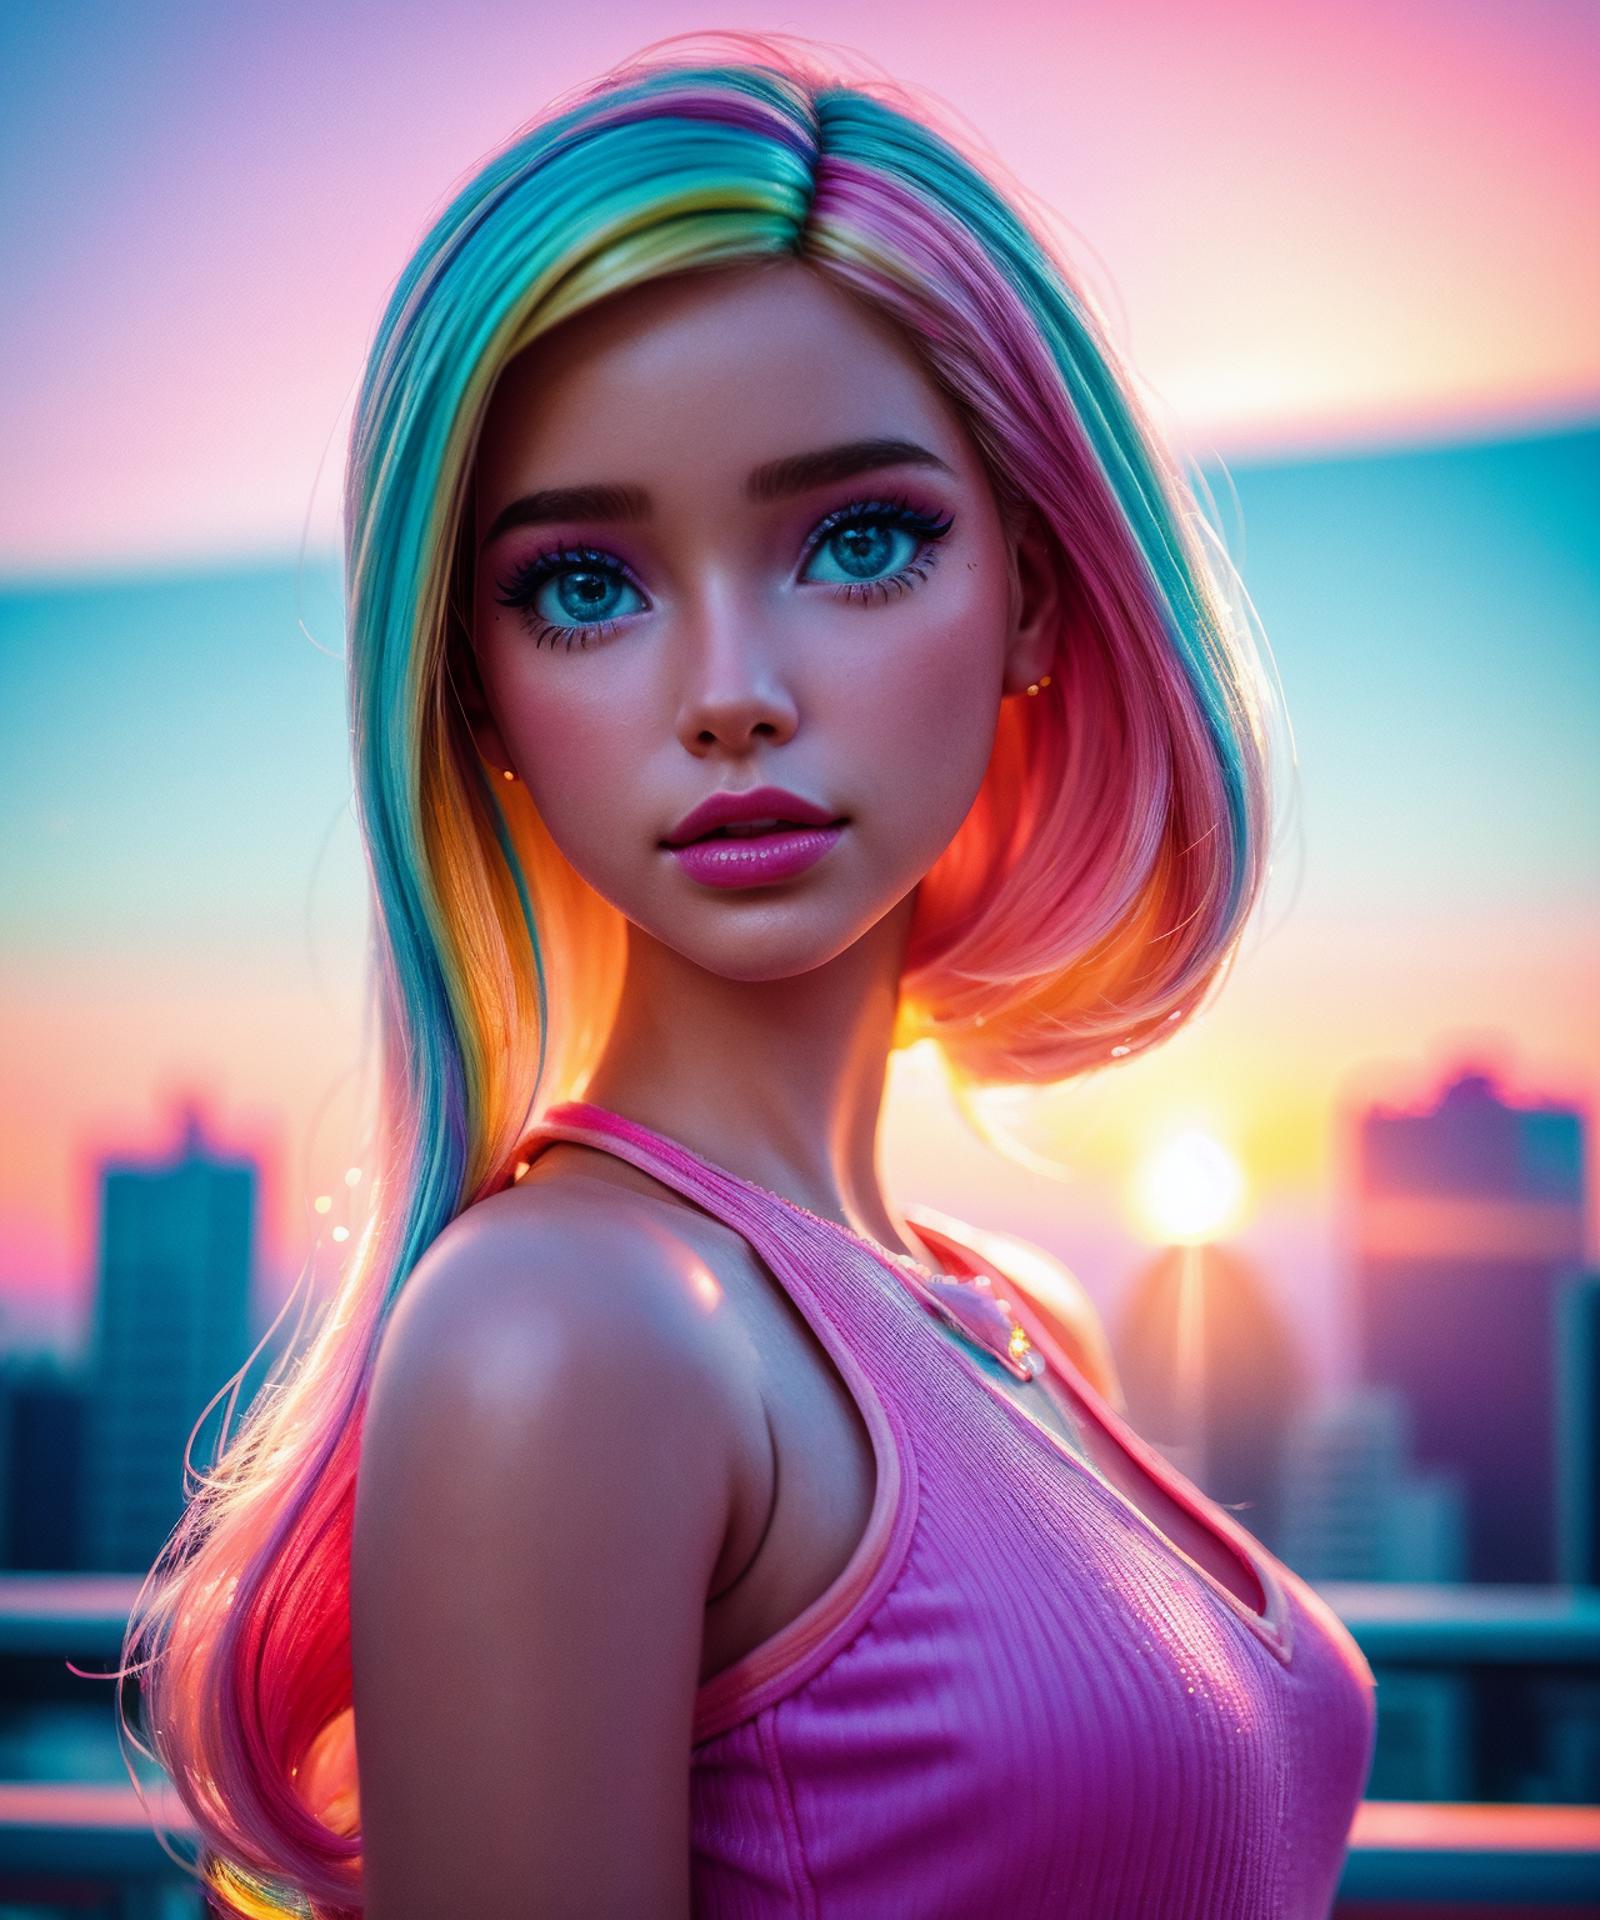 A doll with pink hair, pink shirt, and blue eyes stands in a city with tall buildings.